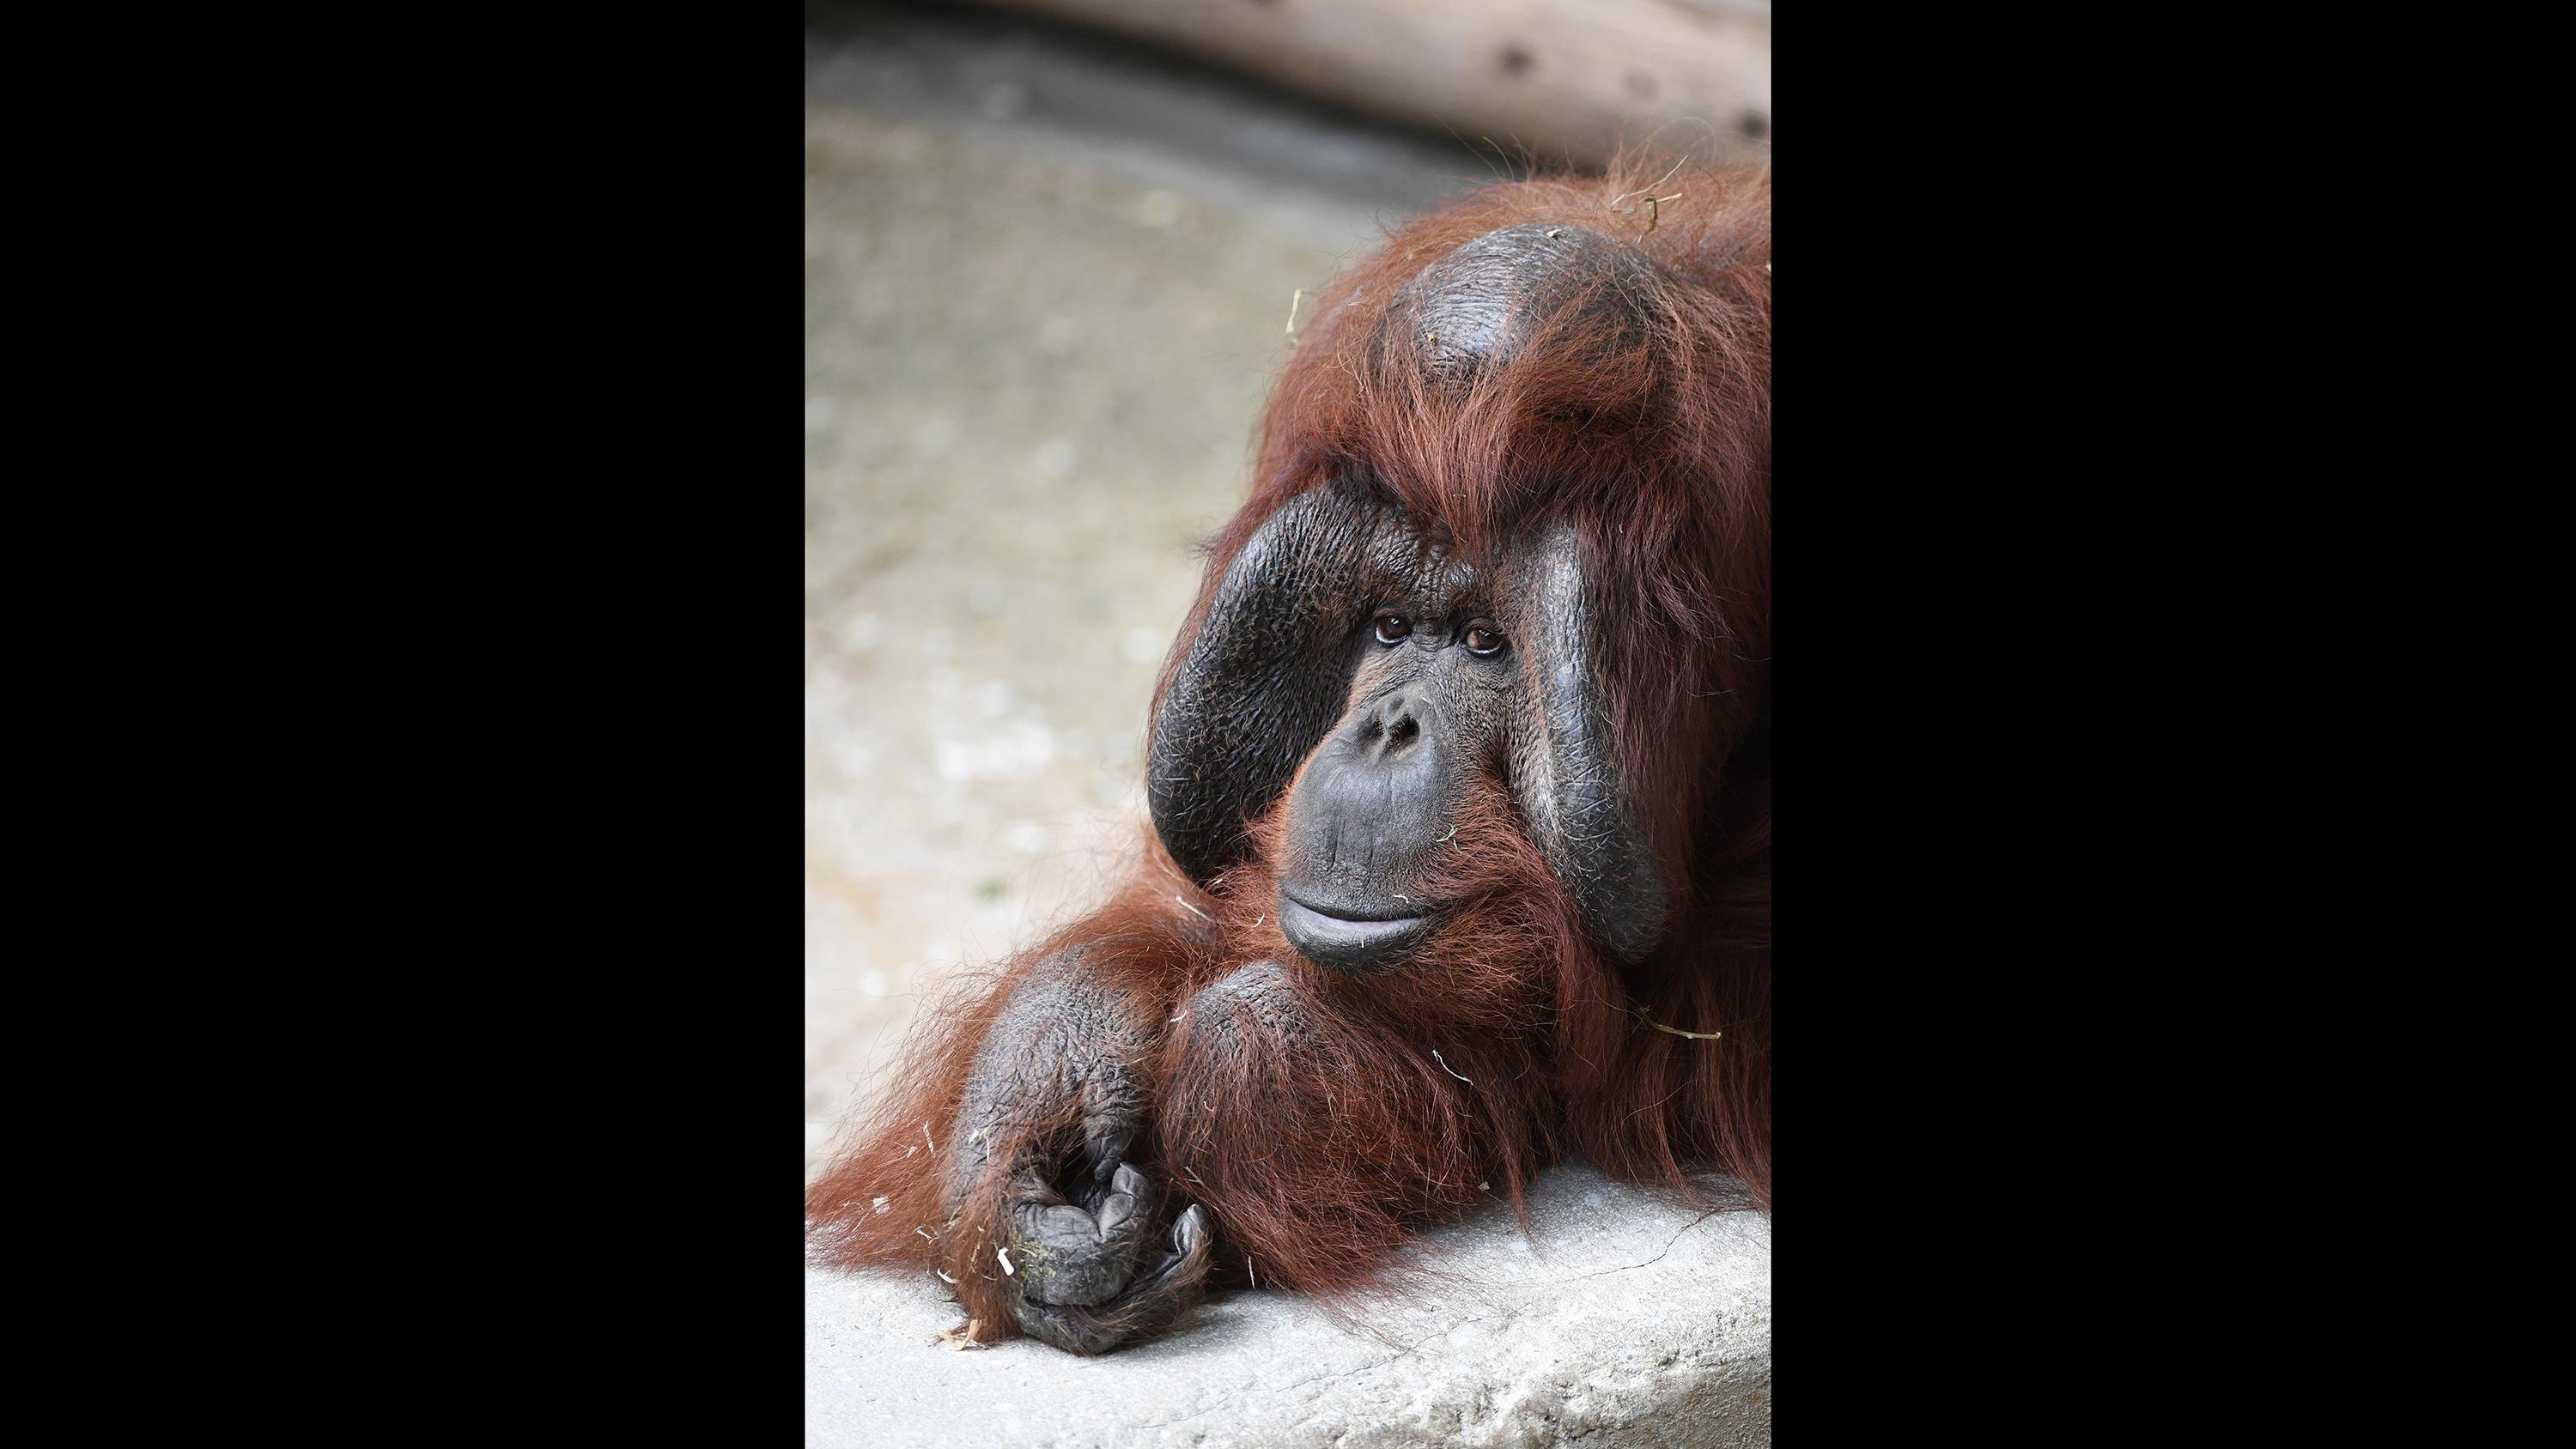 Ben, a 40-year-old orangutan at Brookfield Zoo. (Jim Schulz / Chicago Zoological Society)